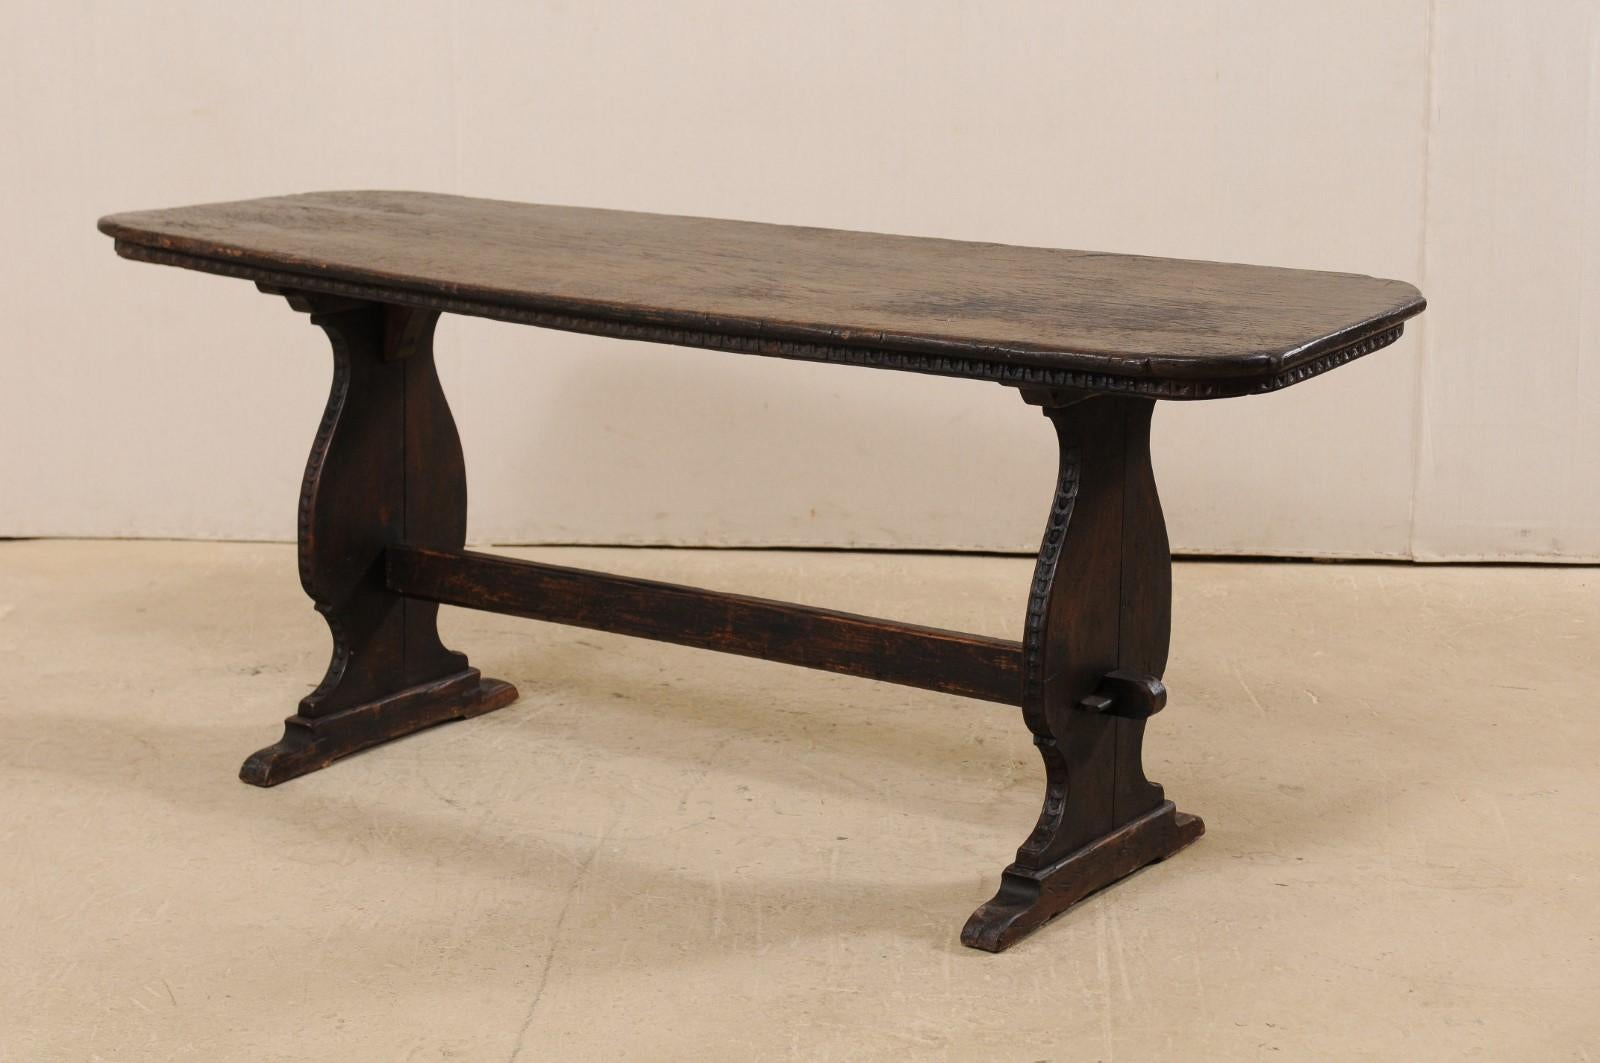 Handsome Antique Italian Console Desk with Nicely Carved Trestle Style Legs 9